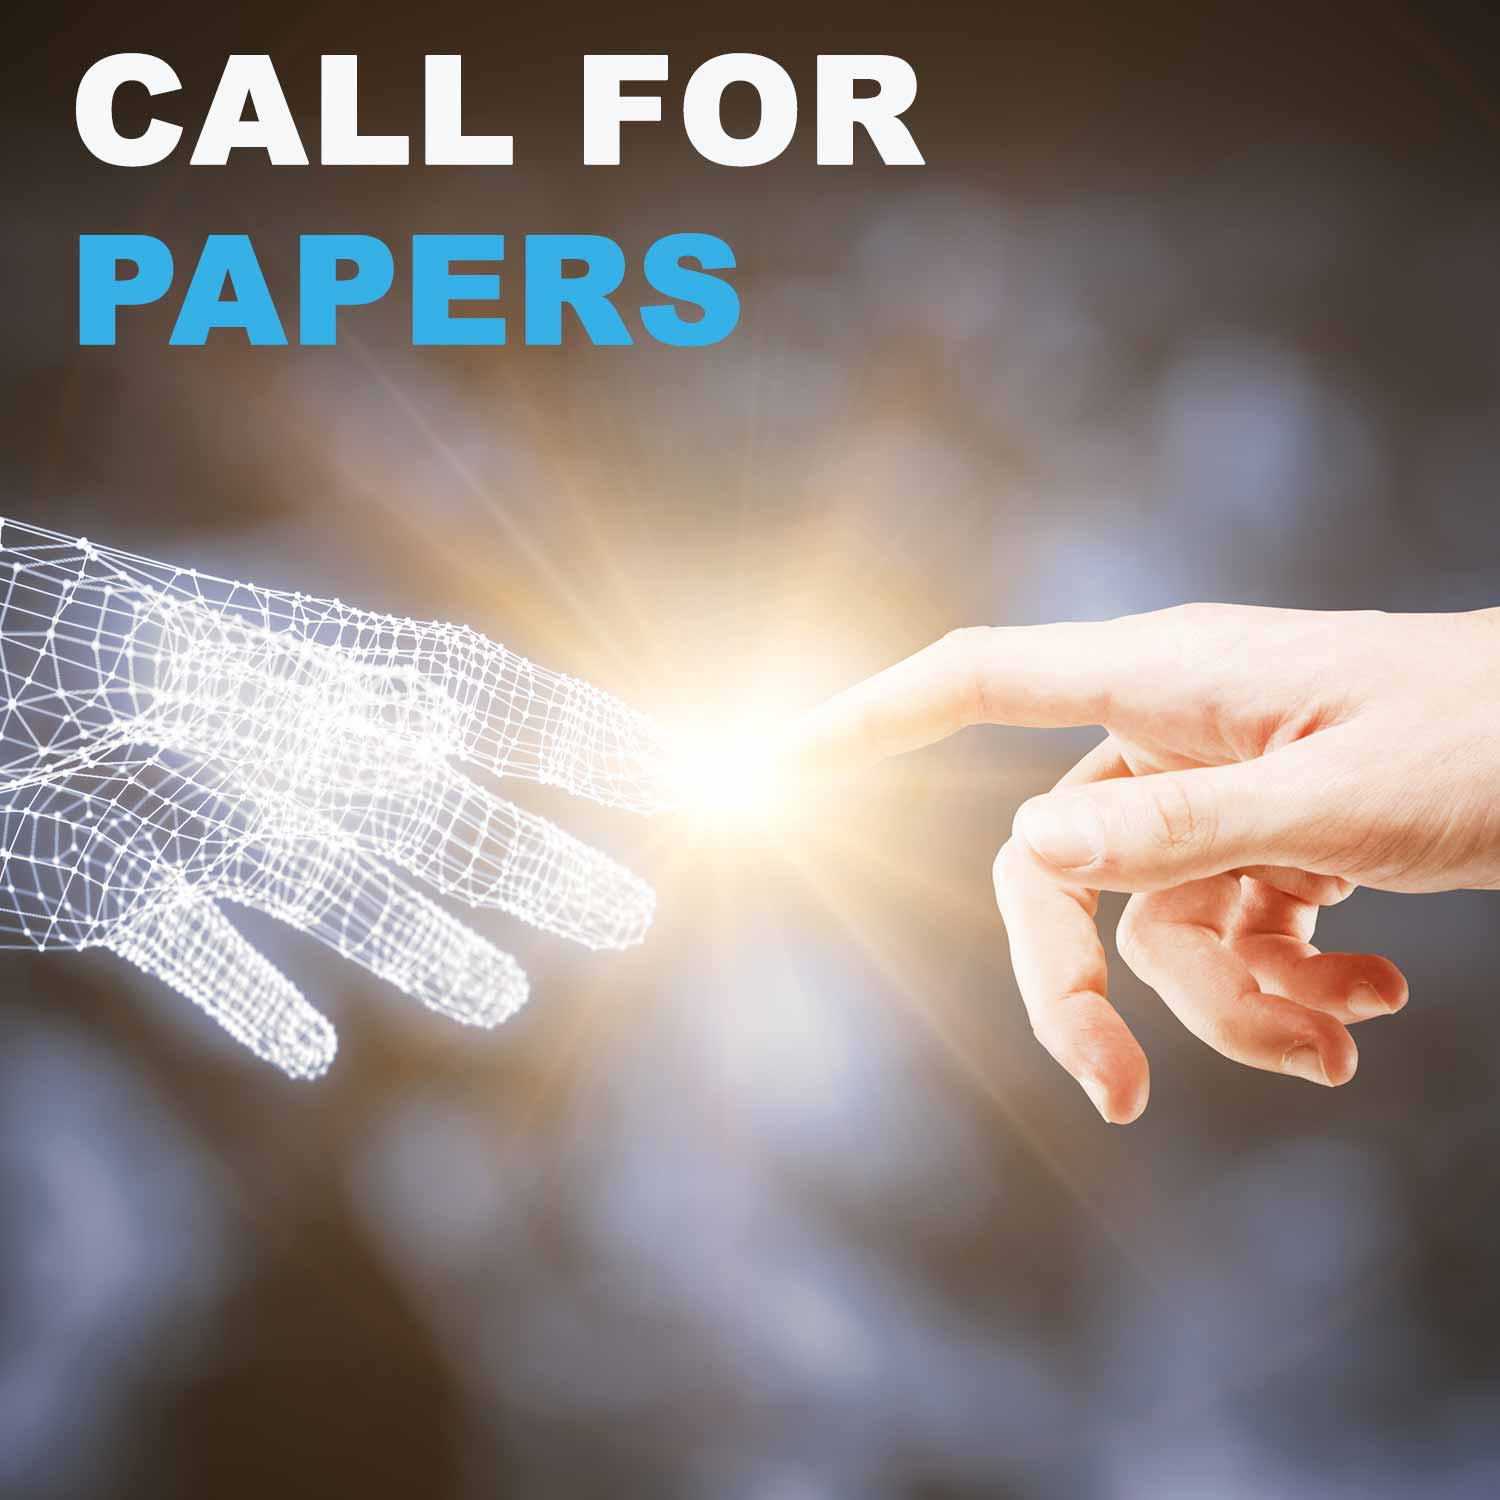 Call for papers: digital research across the humanities